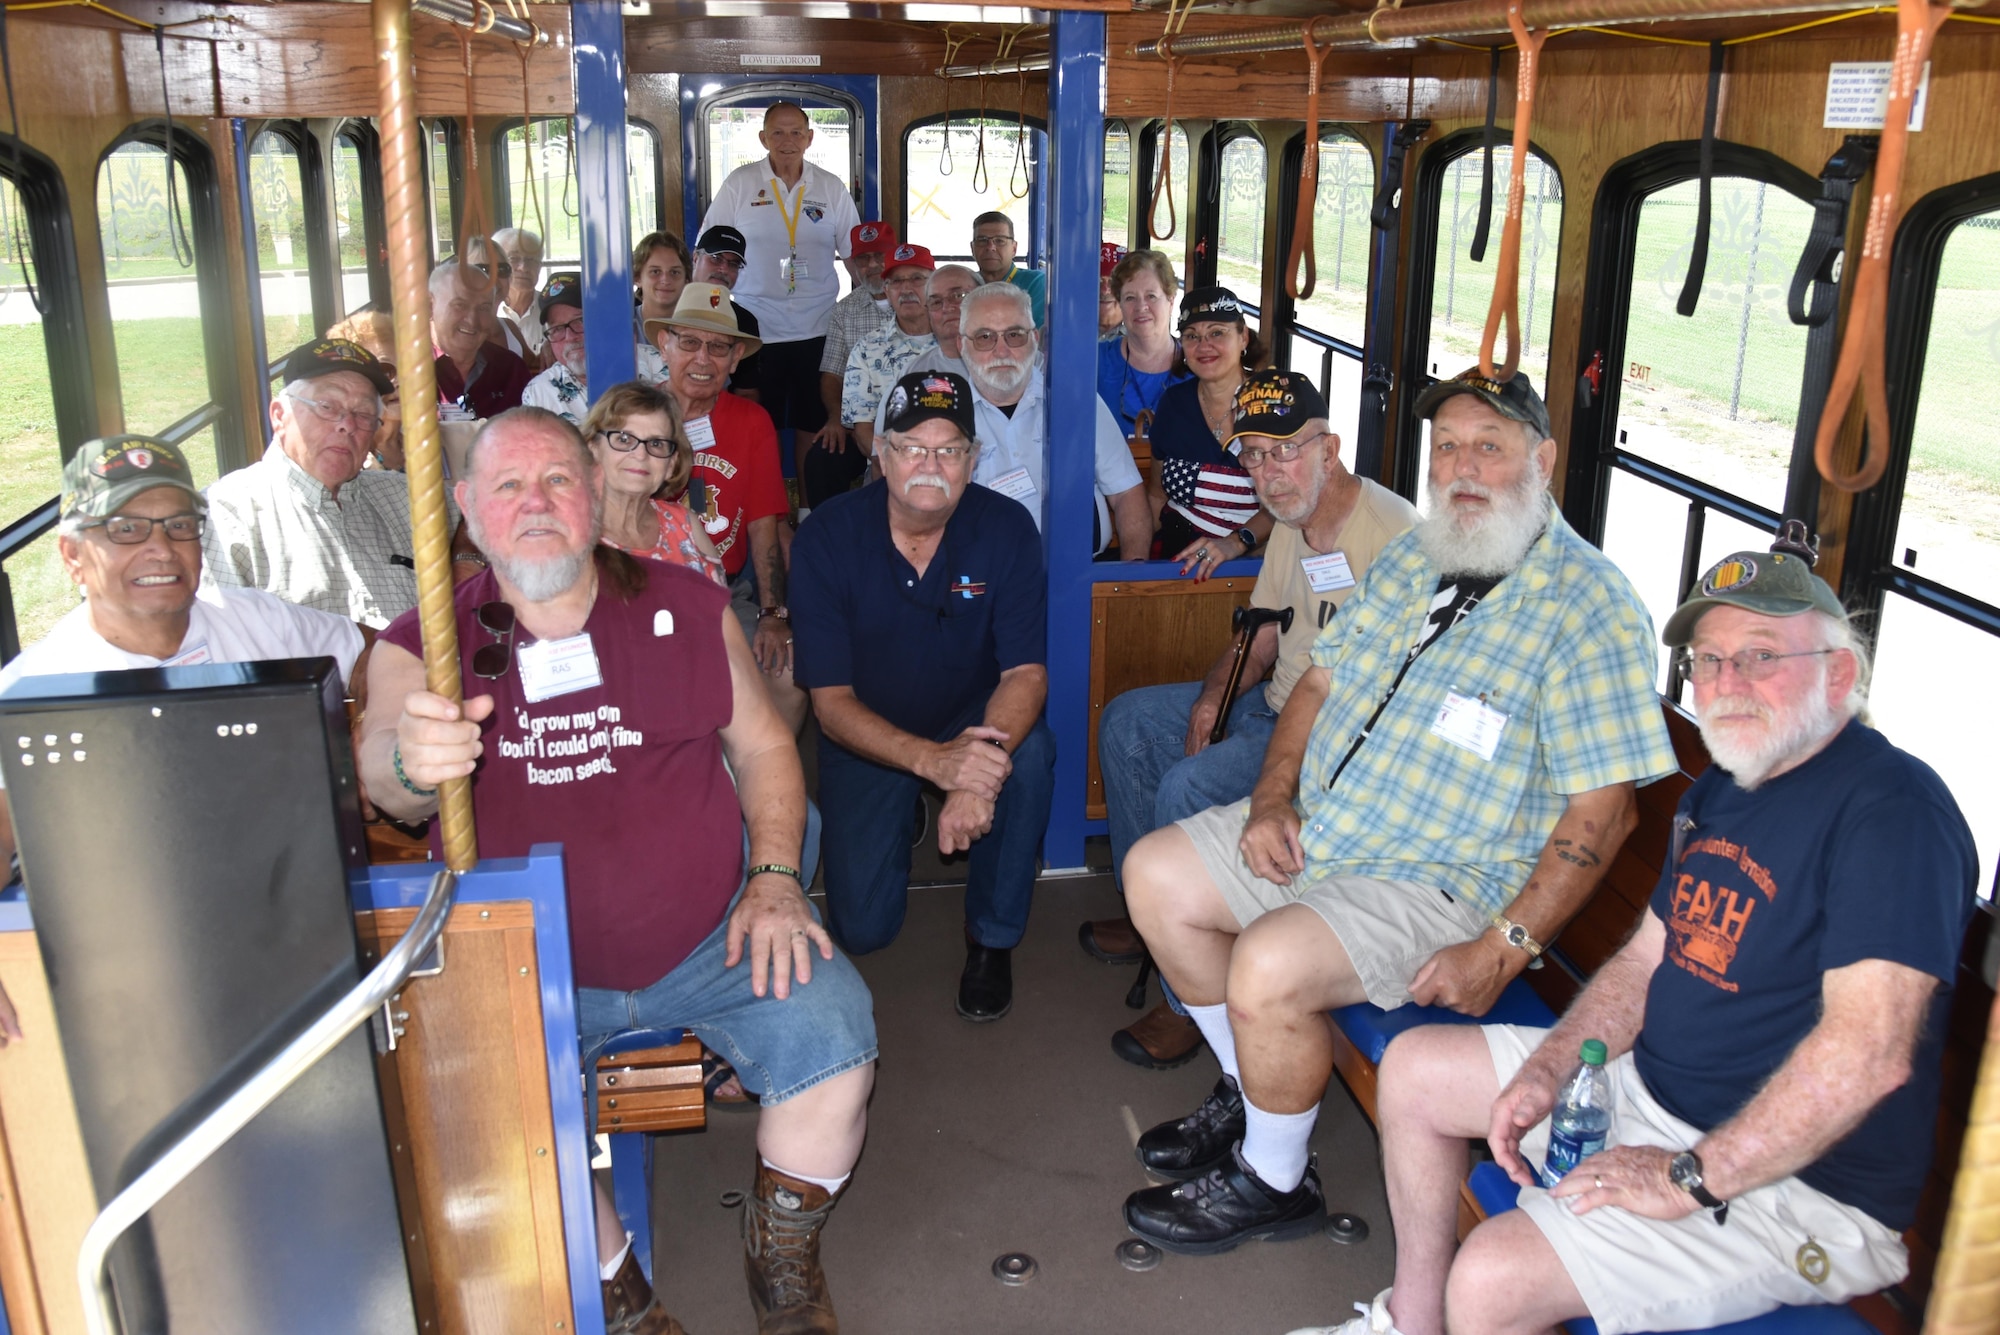 The 355th Red Horse Squadron Vietnam Veterans Reunion group visited Sheppard Air Force Base, July 21, 2017. The group toured the base on a trolley provided by the city of Wichita Falls. (U.S. Air Force photo by 2nd Lt. Jacqueline Jastrzebski)